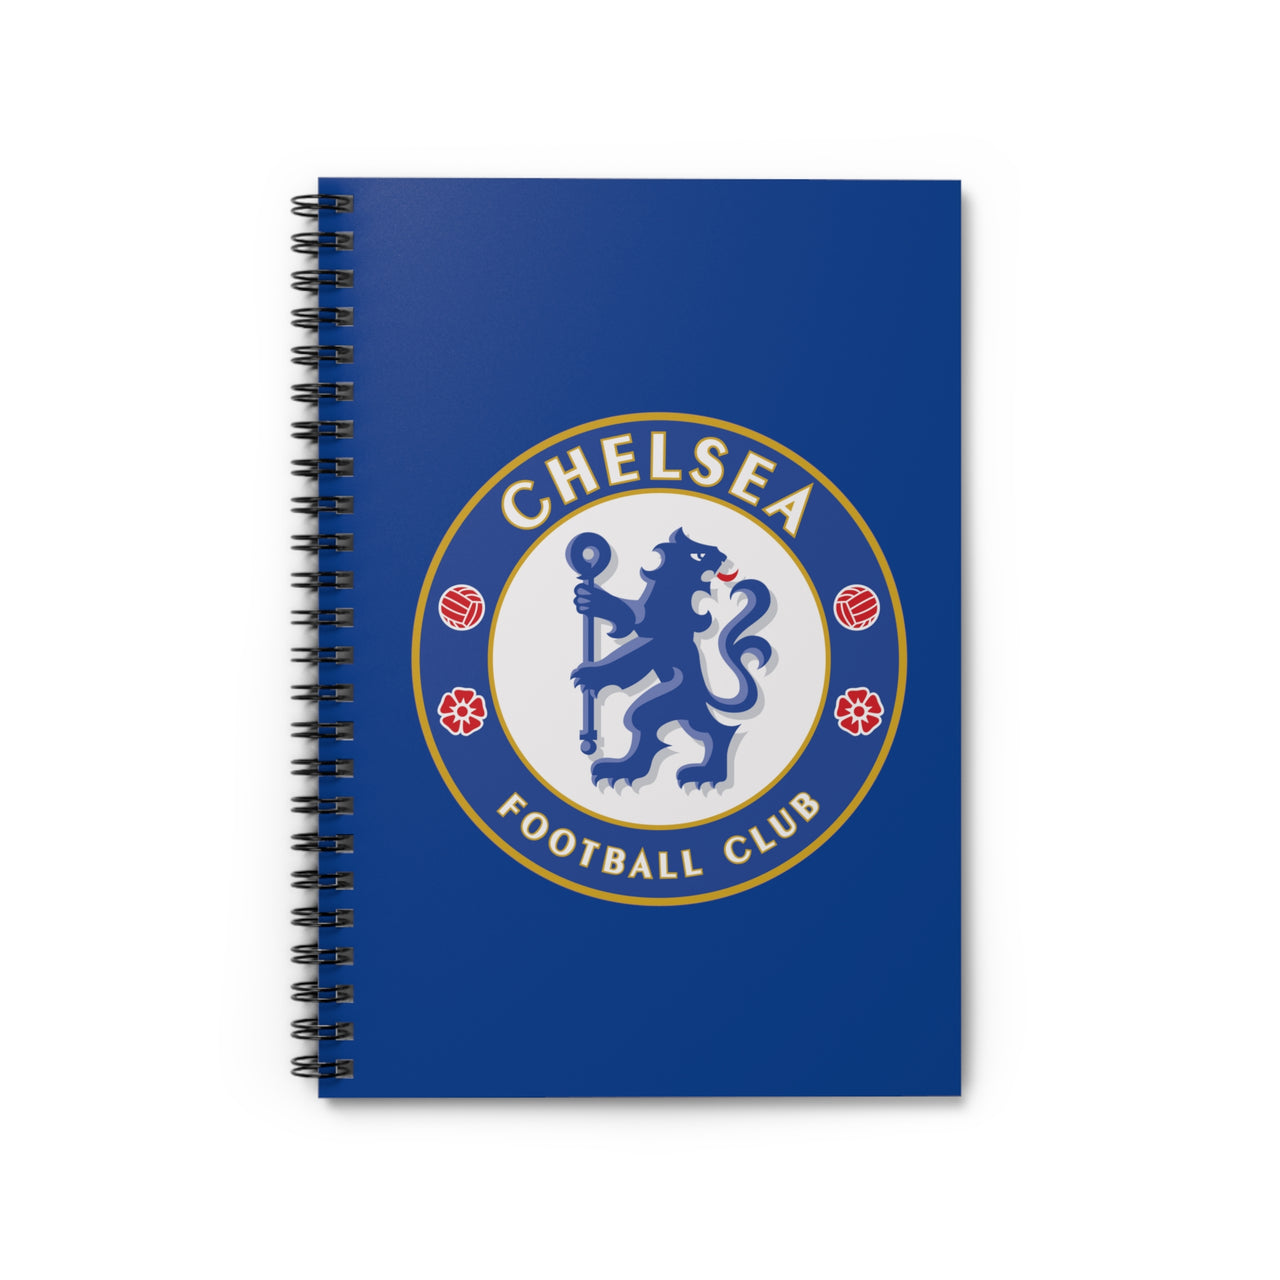 Chelsea Spiral Notebook - Ruled Line